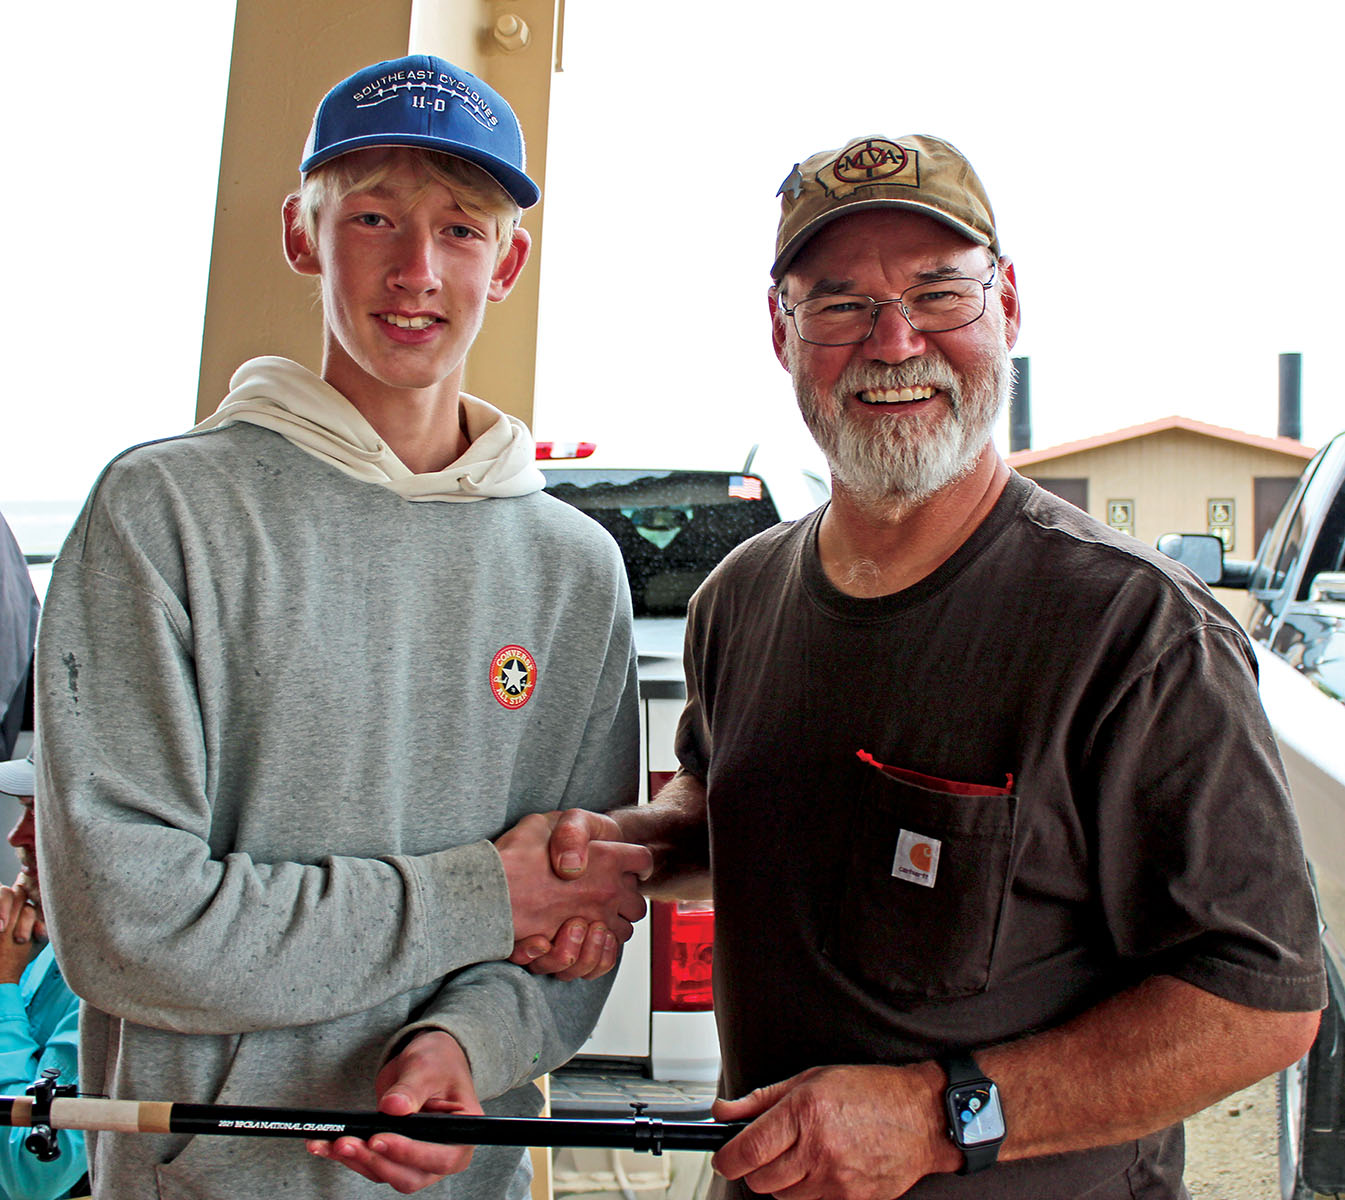 Cole Sauer is presented with his engraved scope by Jim Gier of Montana Vintage Arms.